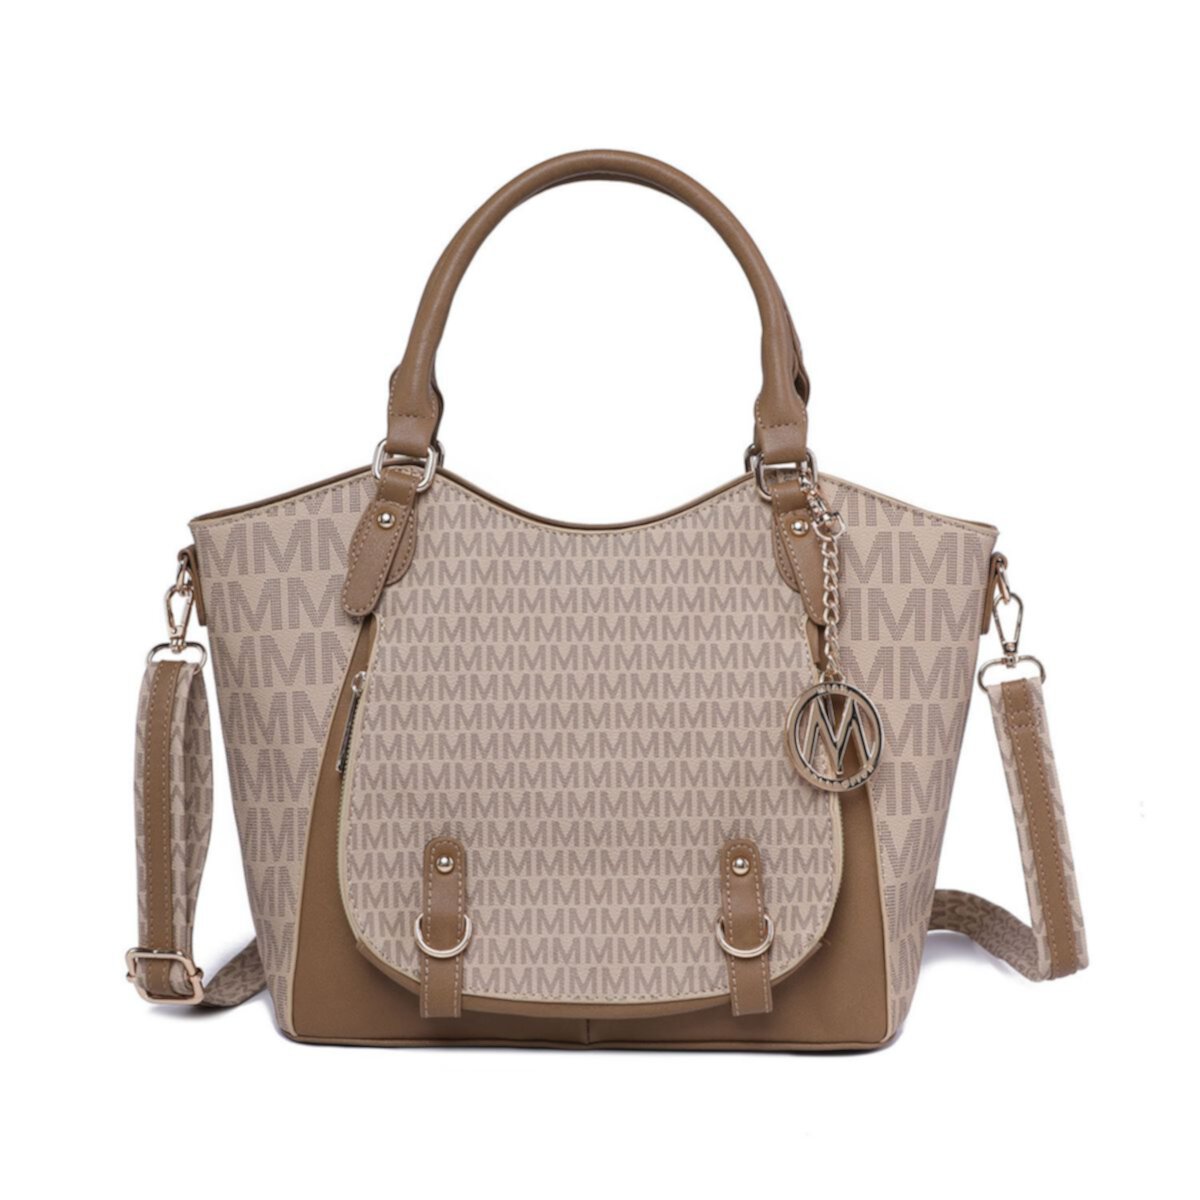 Mkf Collection Talula Signature Printed Vegan Leather Women’s Satchel Bag By Mia K MKF Collection